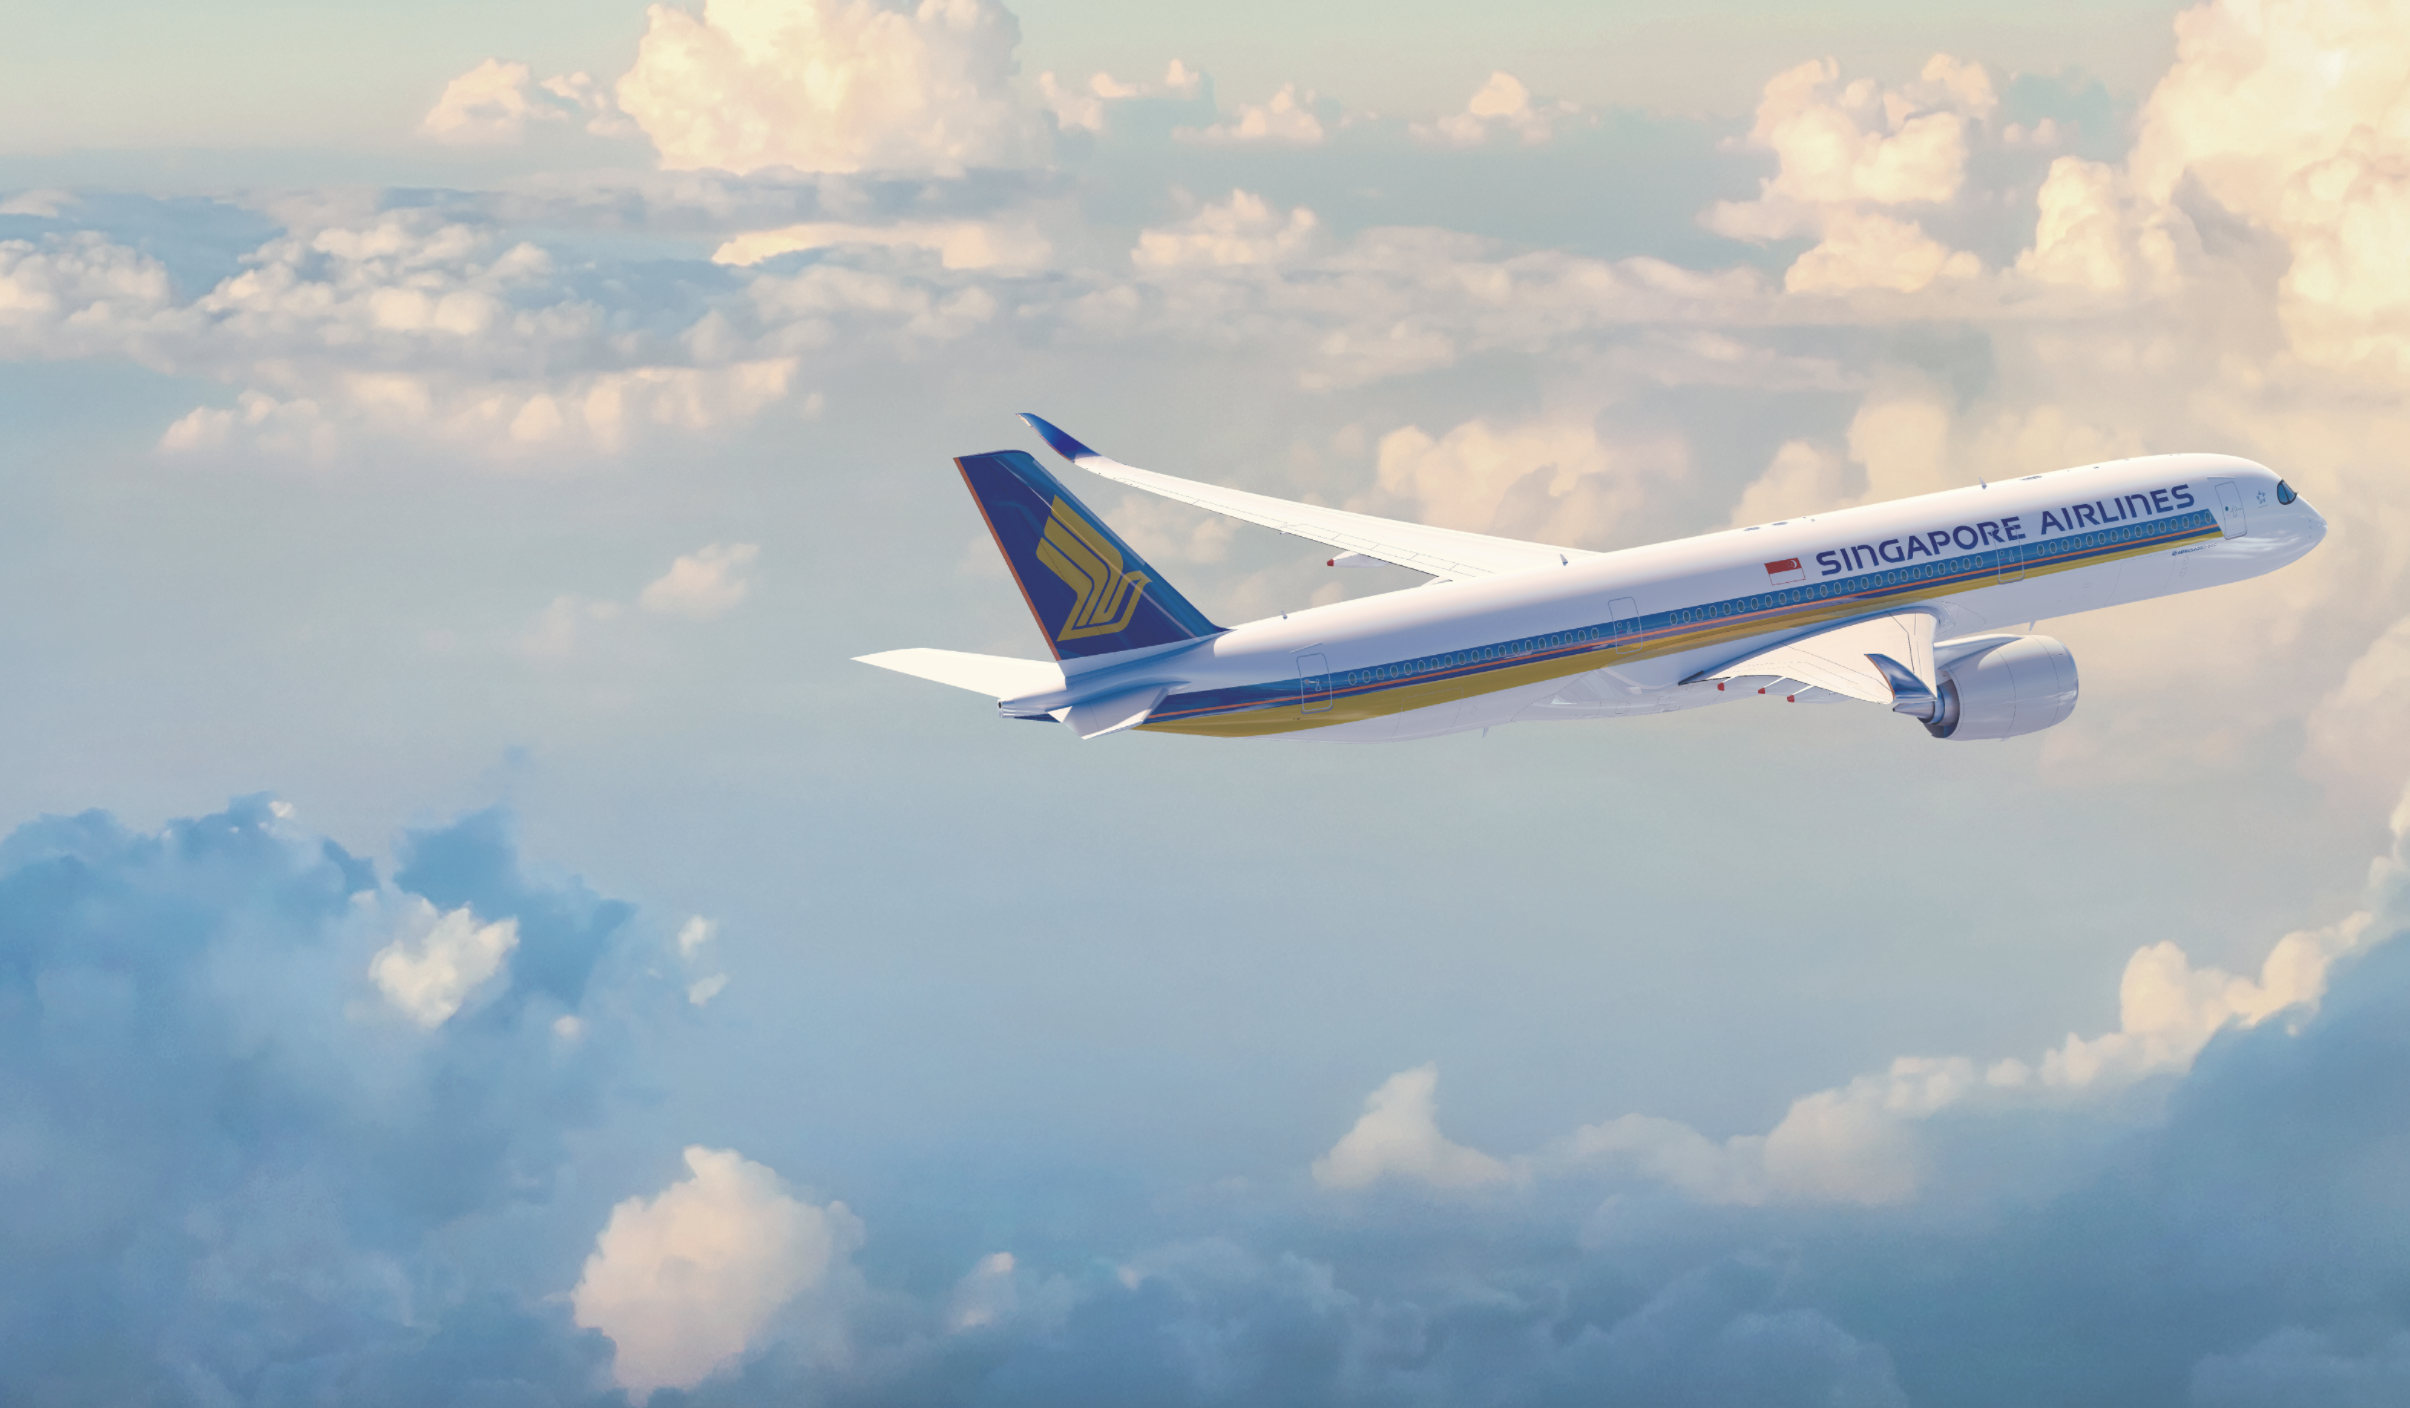 Globeshrinker: Singapore Airlines Airbus A350-900